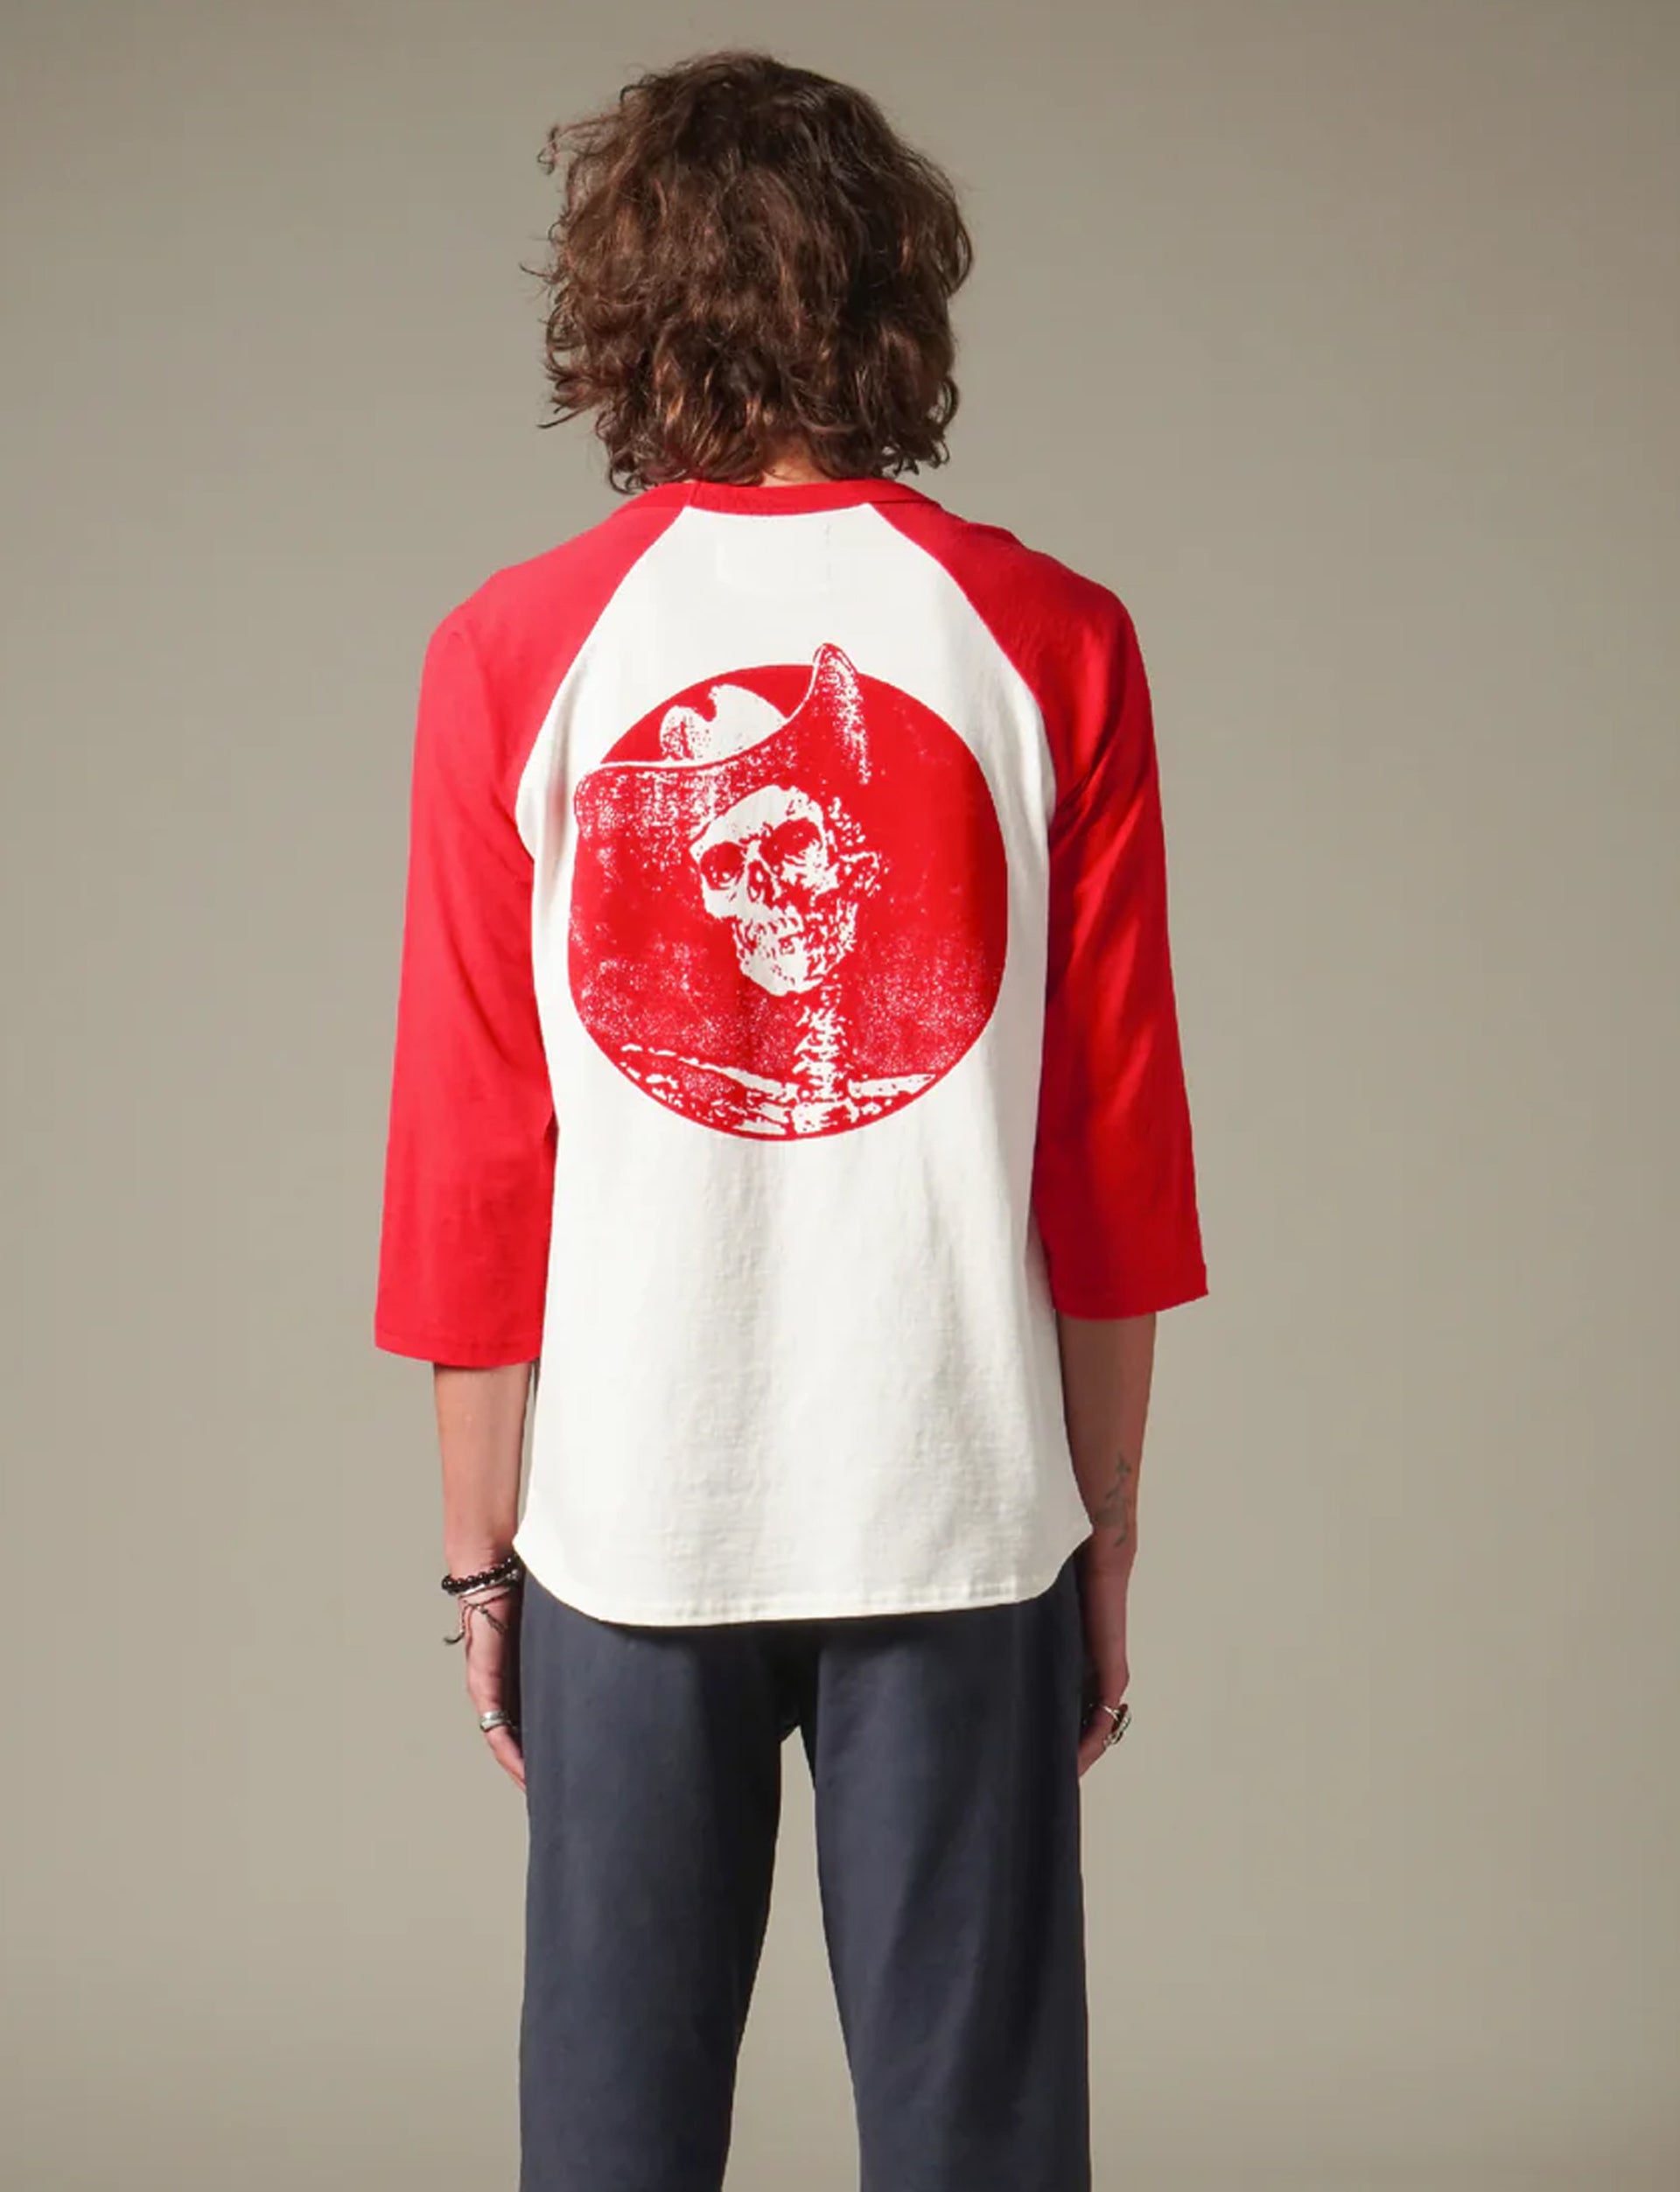 ONE OF THESE DAYS PASSED TIME RAGLAN BONE RED